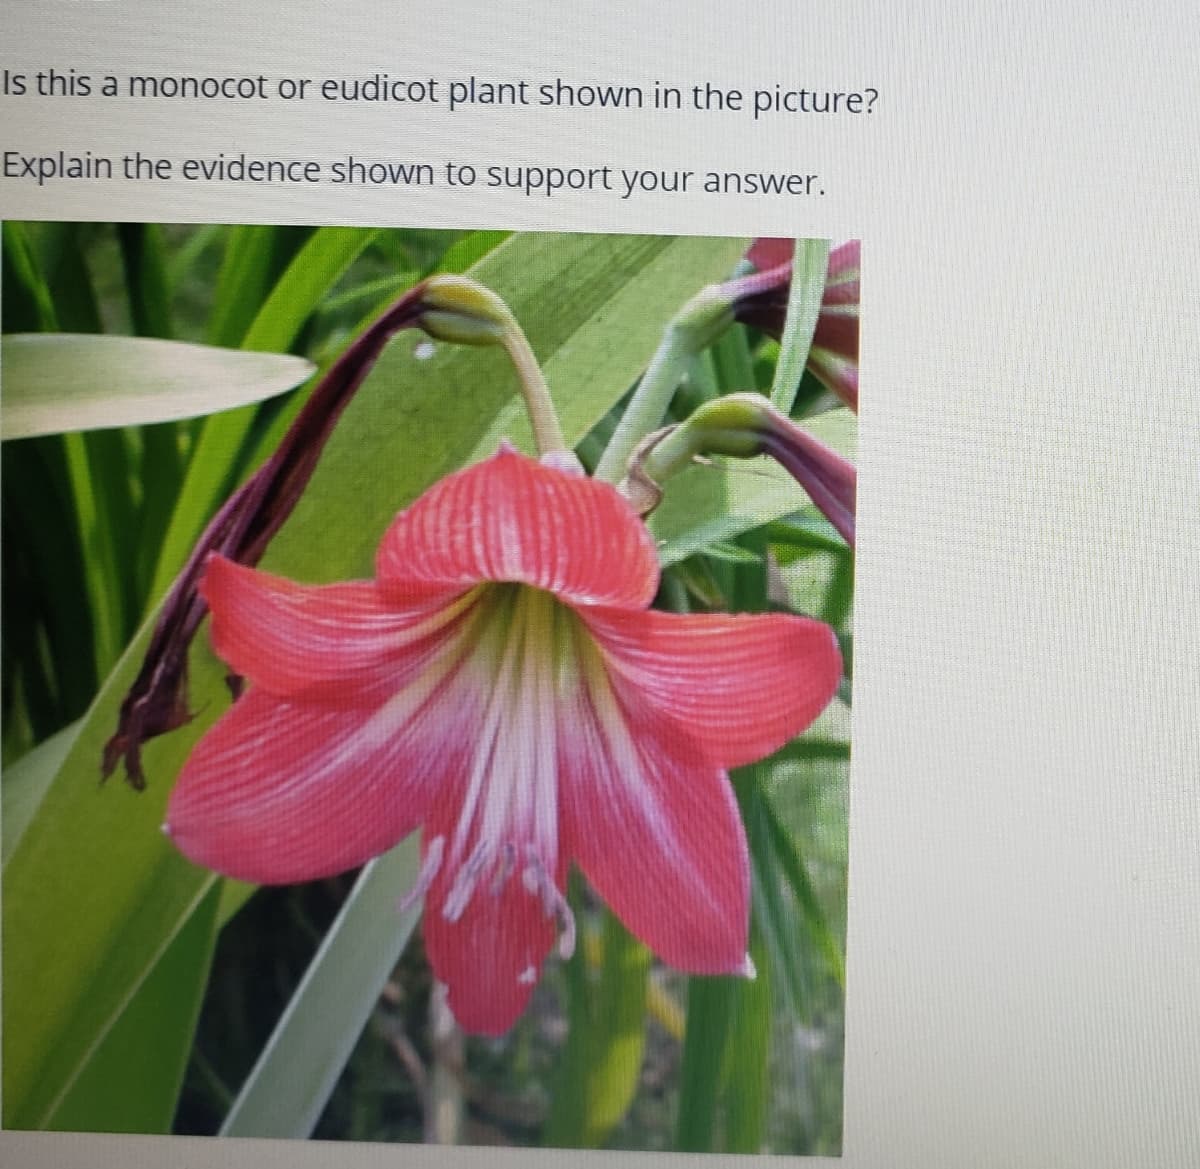 Is this a monocot or eudicot plant shown in the picture?
Explain the evidence shown to support your answer.
